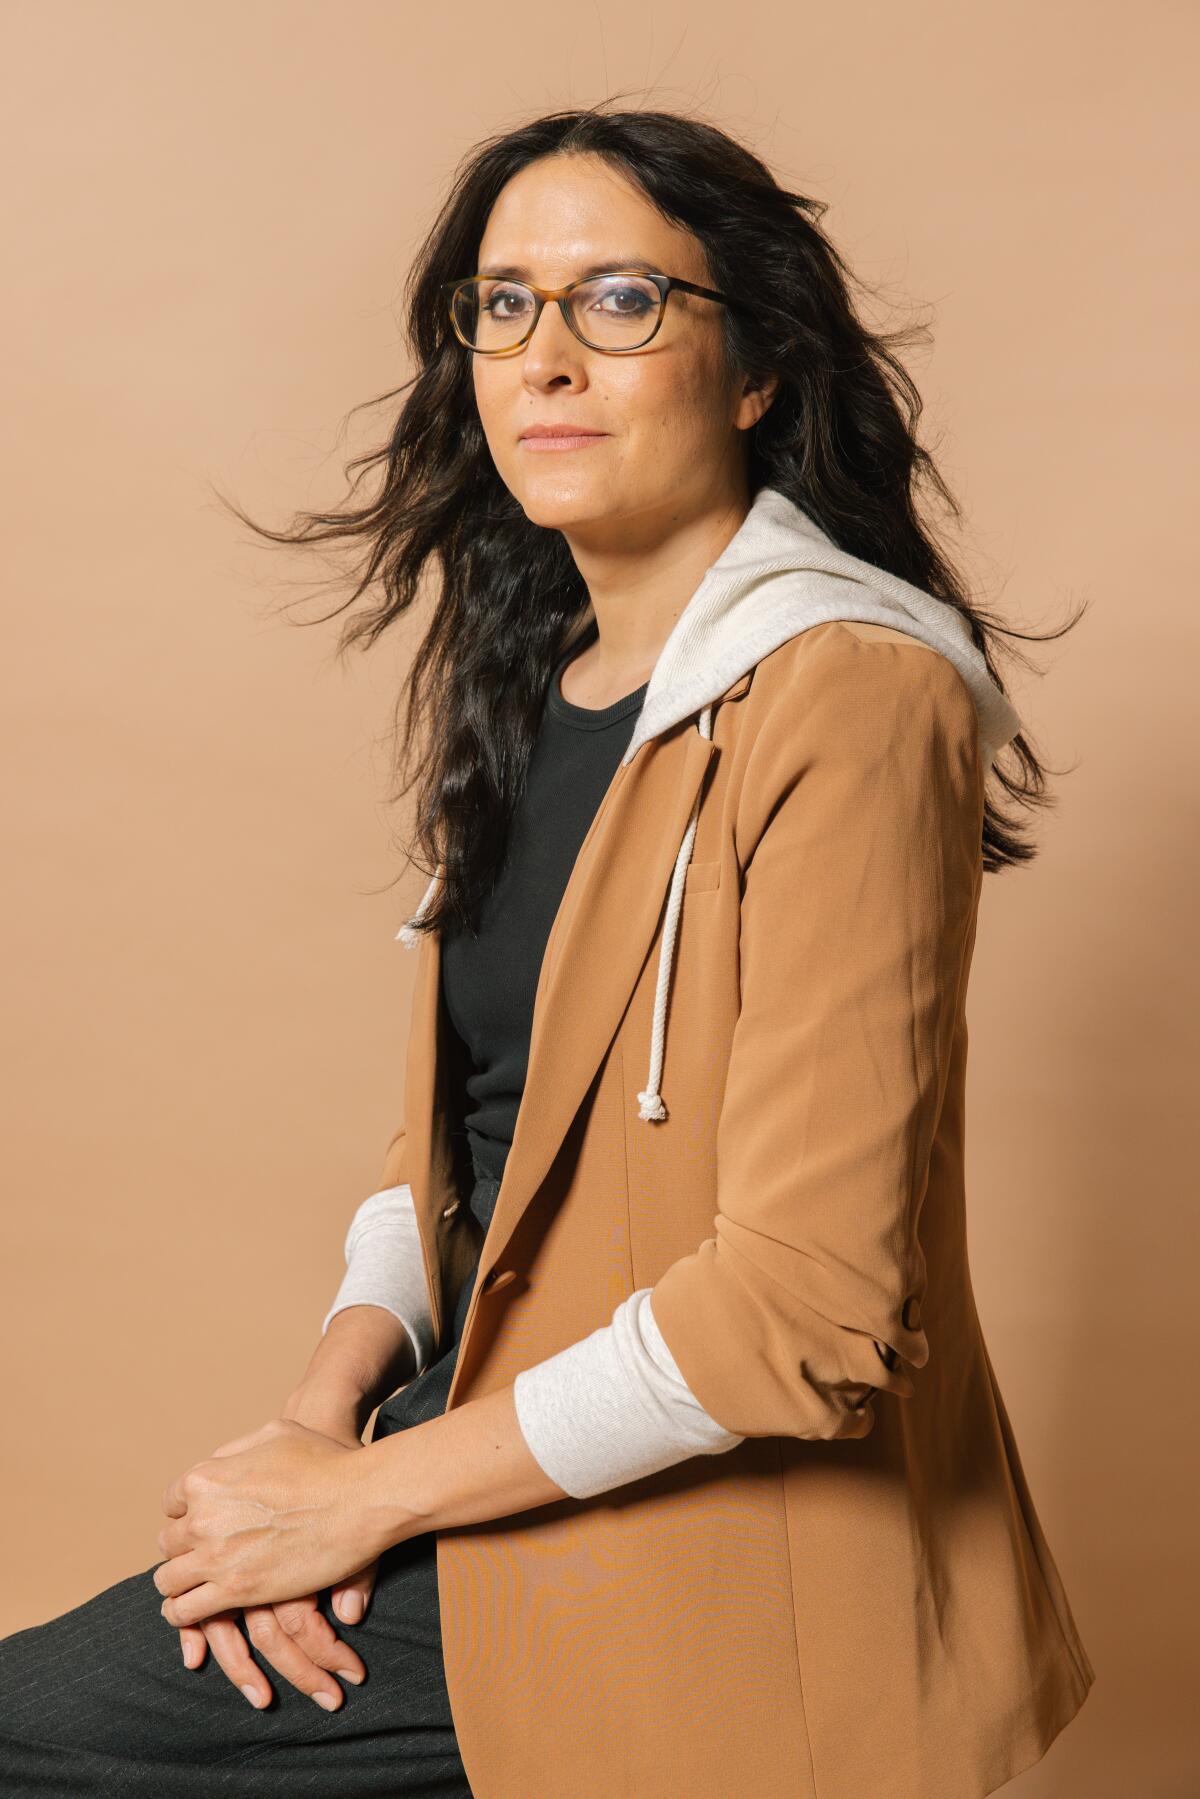 A woman in glasses and long hair looks at the camera.